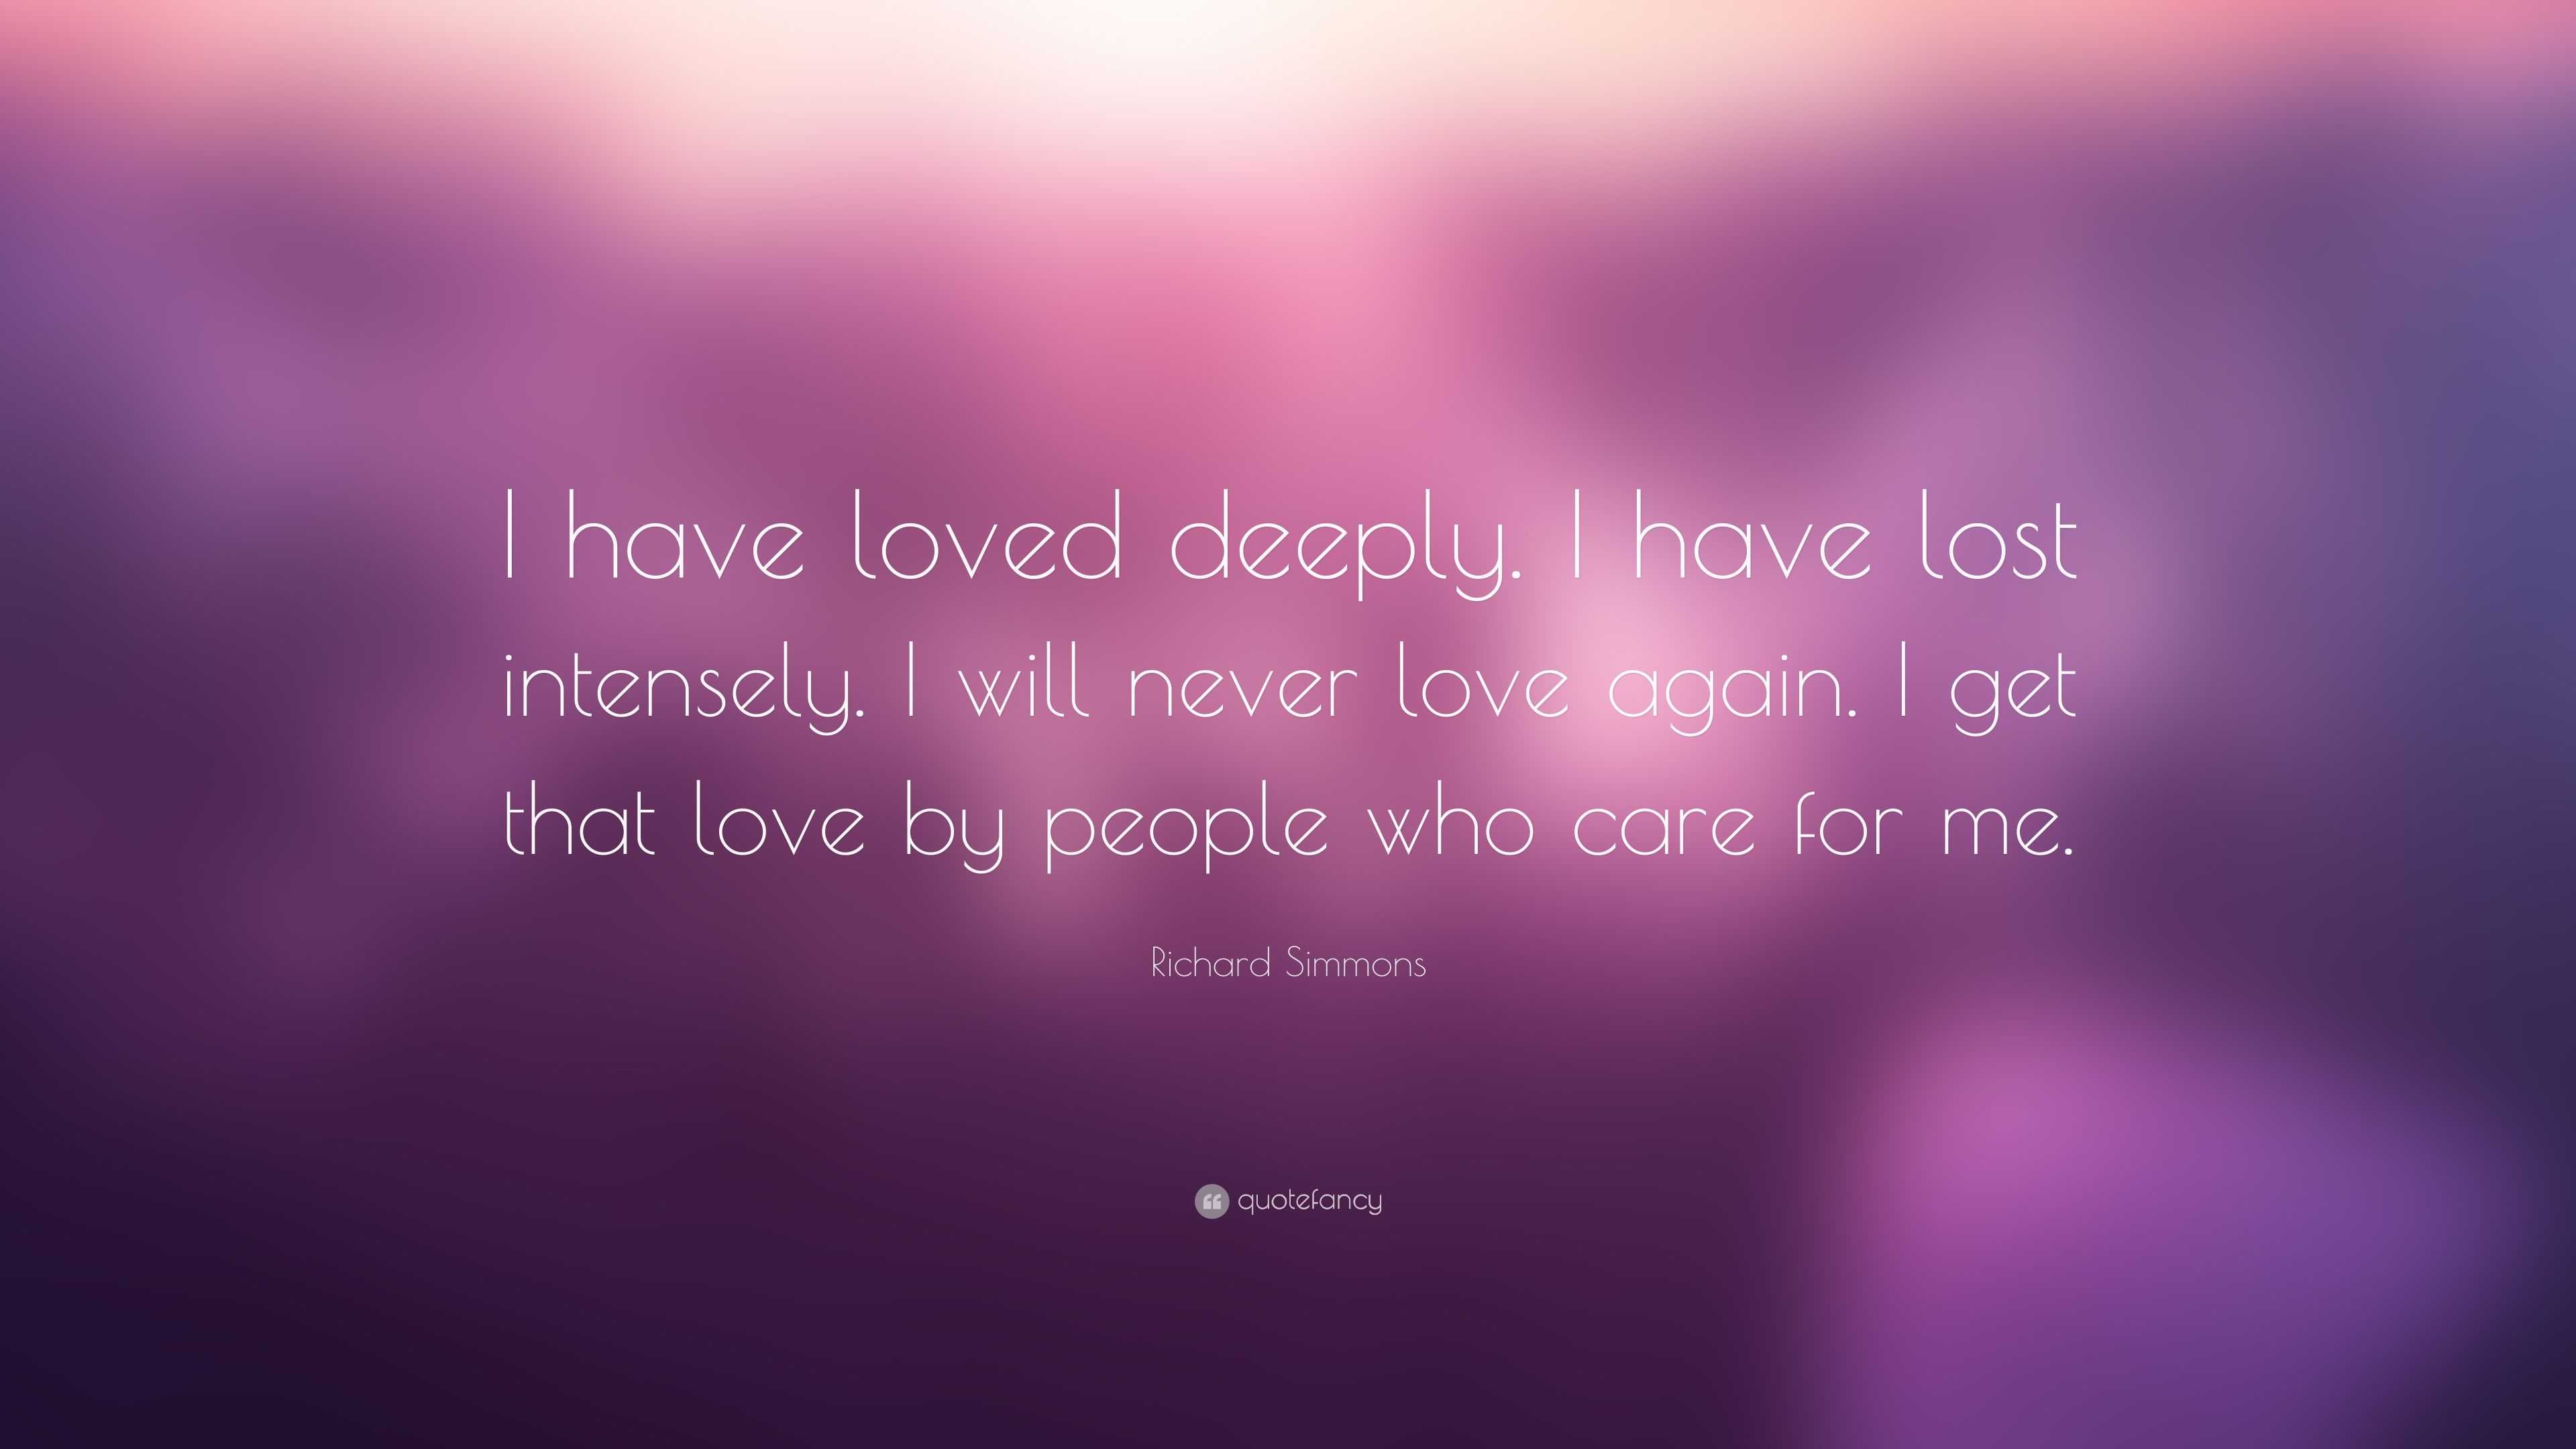 Richard Simmons Quote: “I have loved deeply. I have lost intensely. I ...